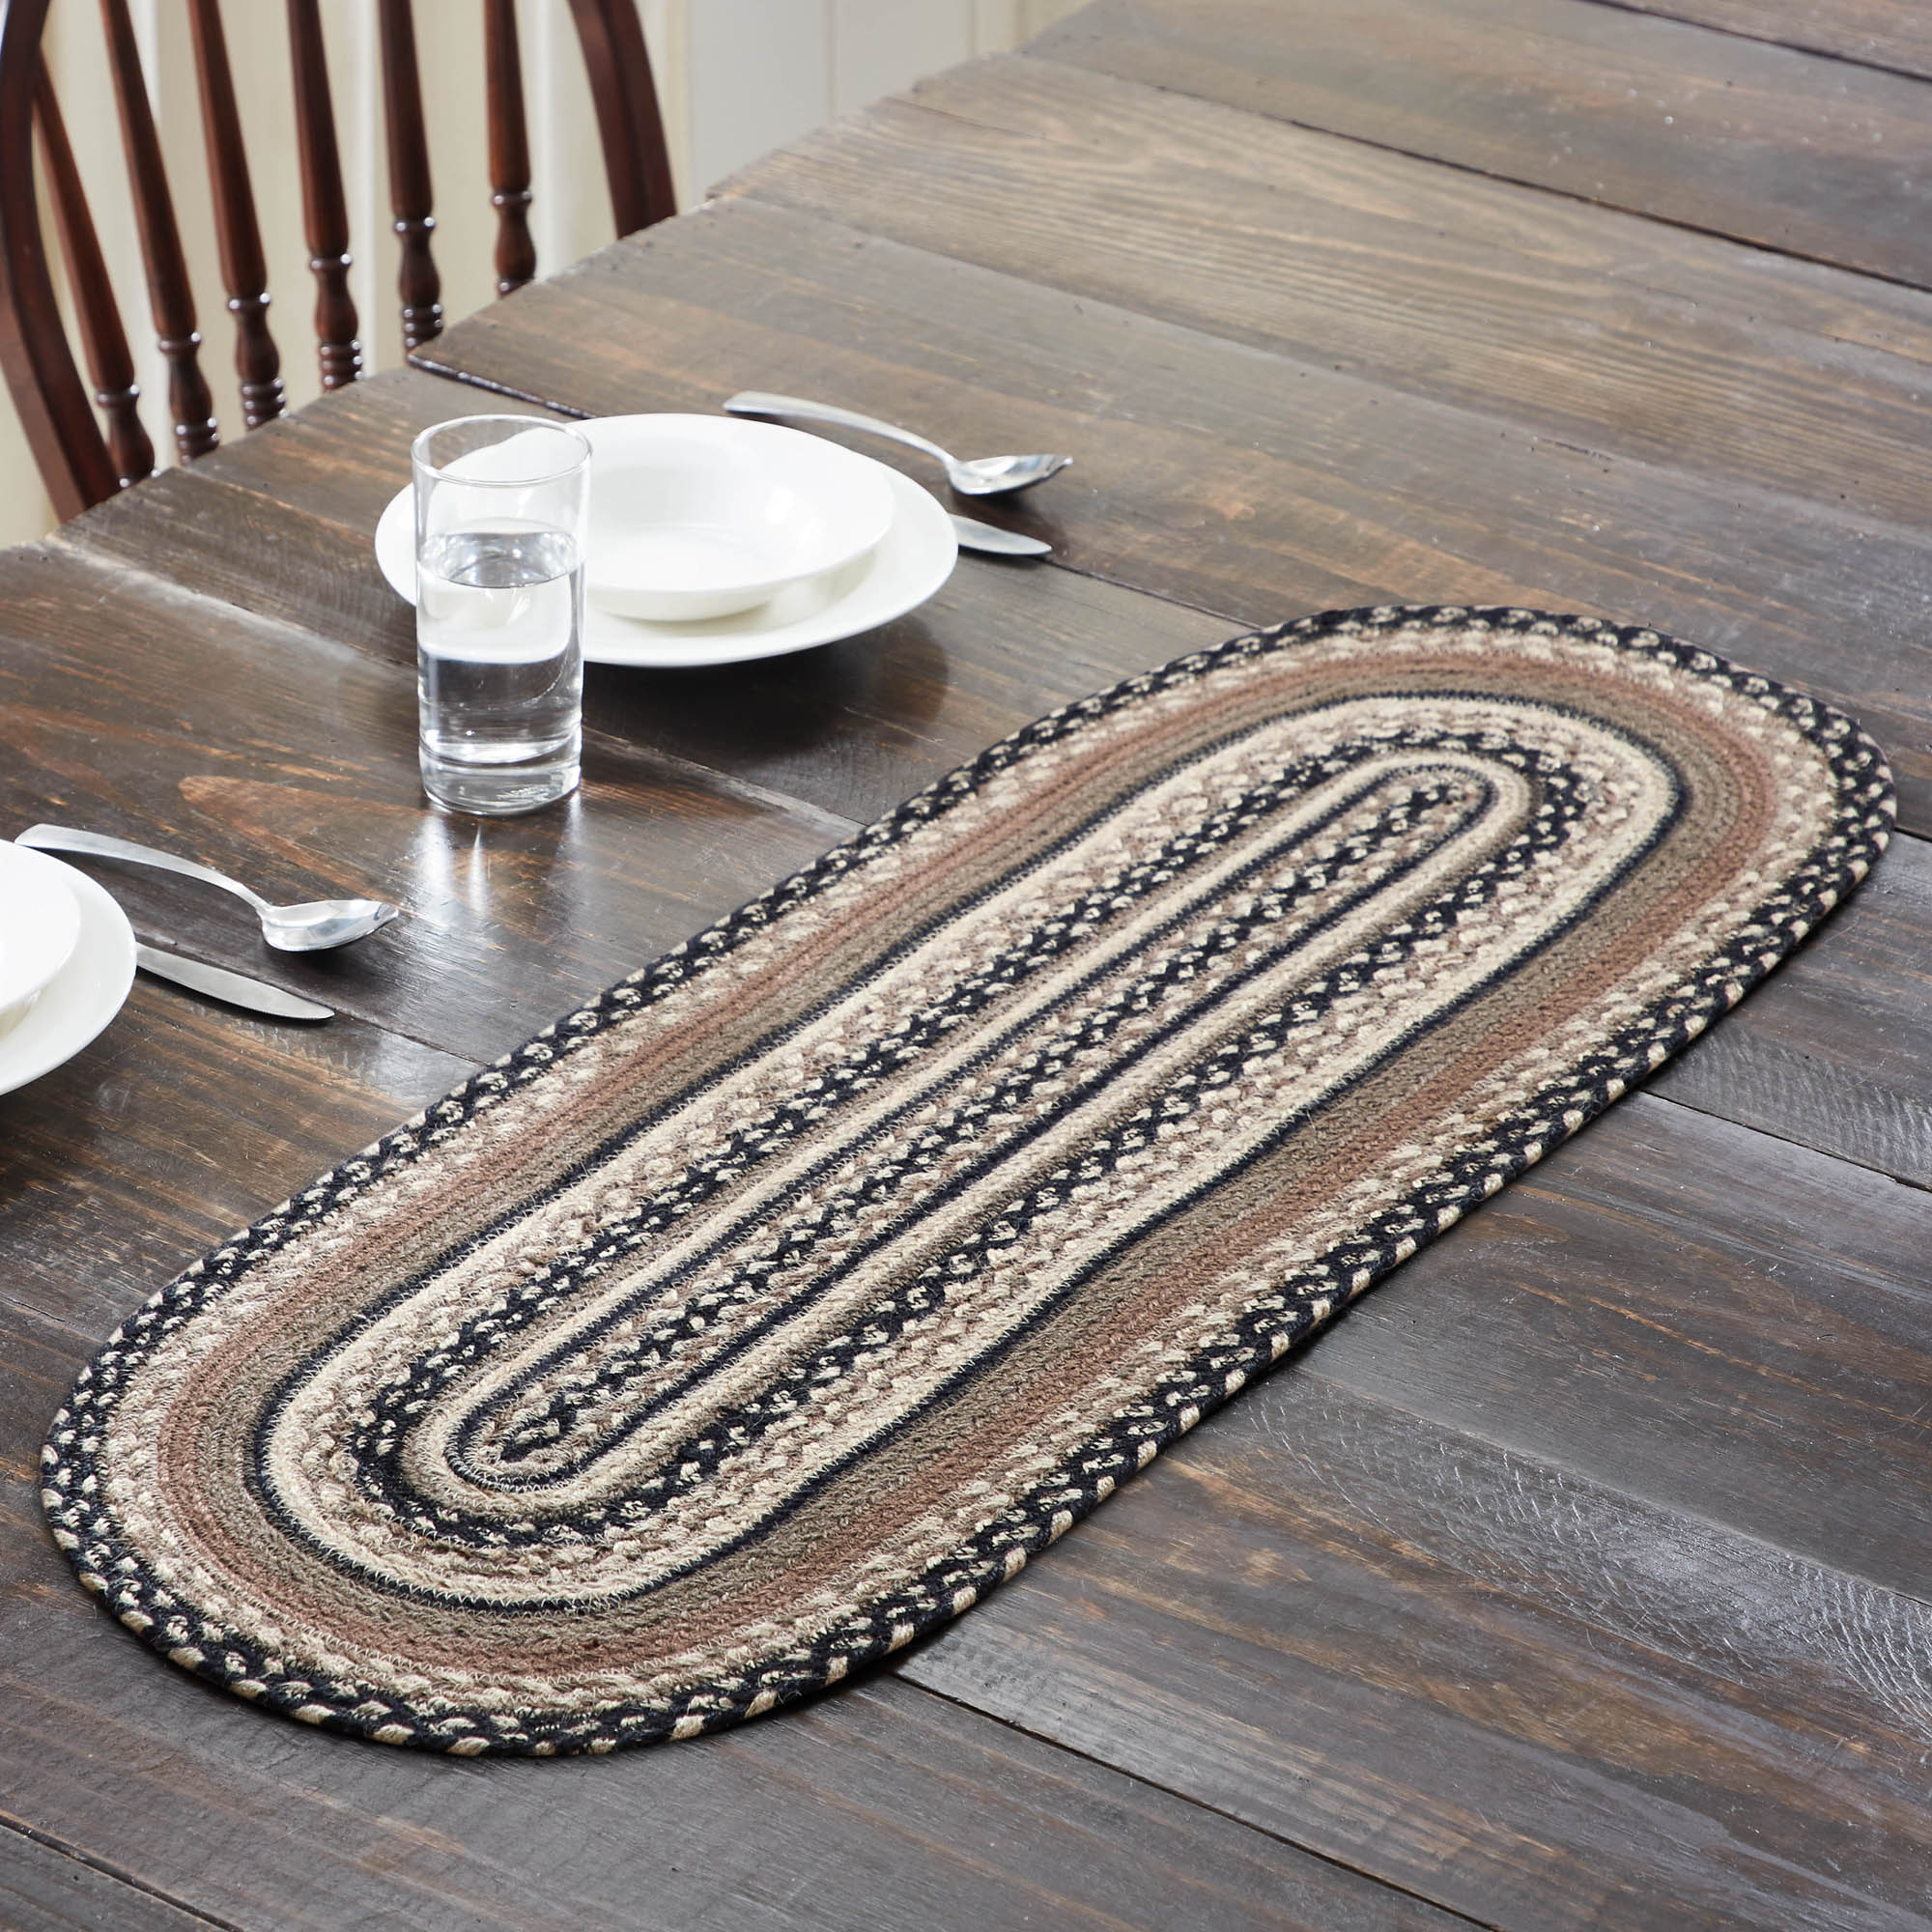 Sawyer Mill Charcoal Creme Jute Braided Oval Table Runner 13"x36" VHC Brands